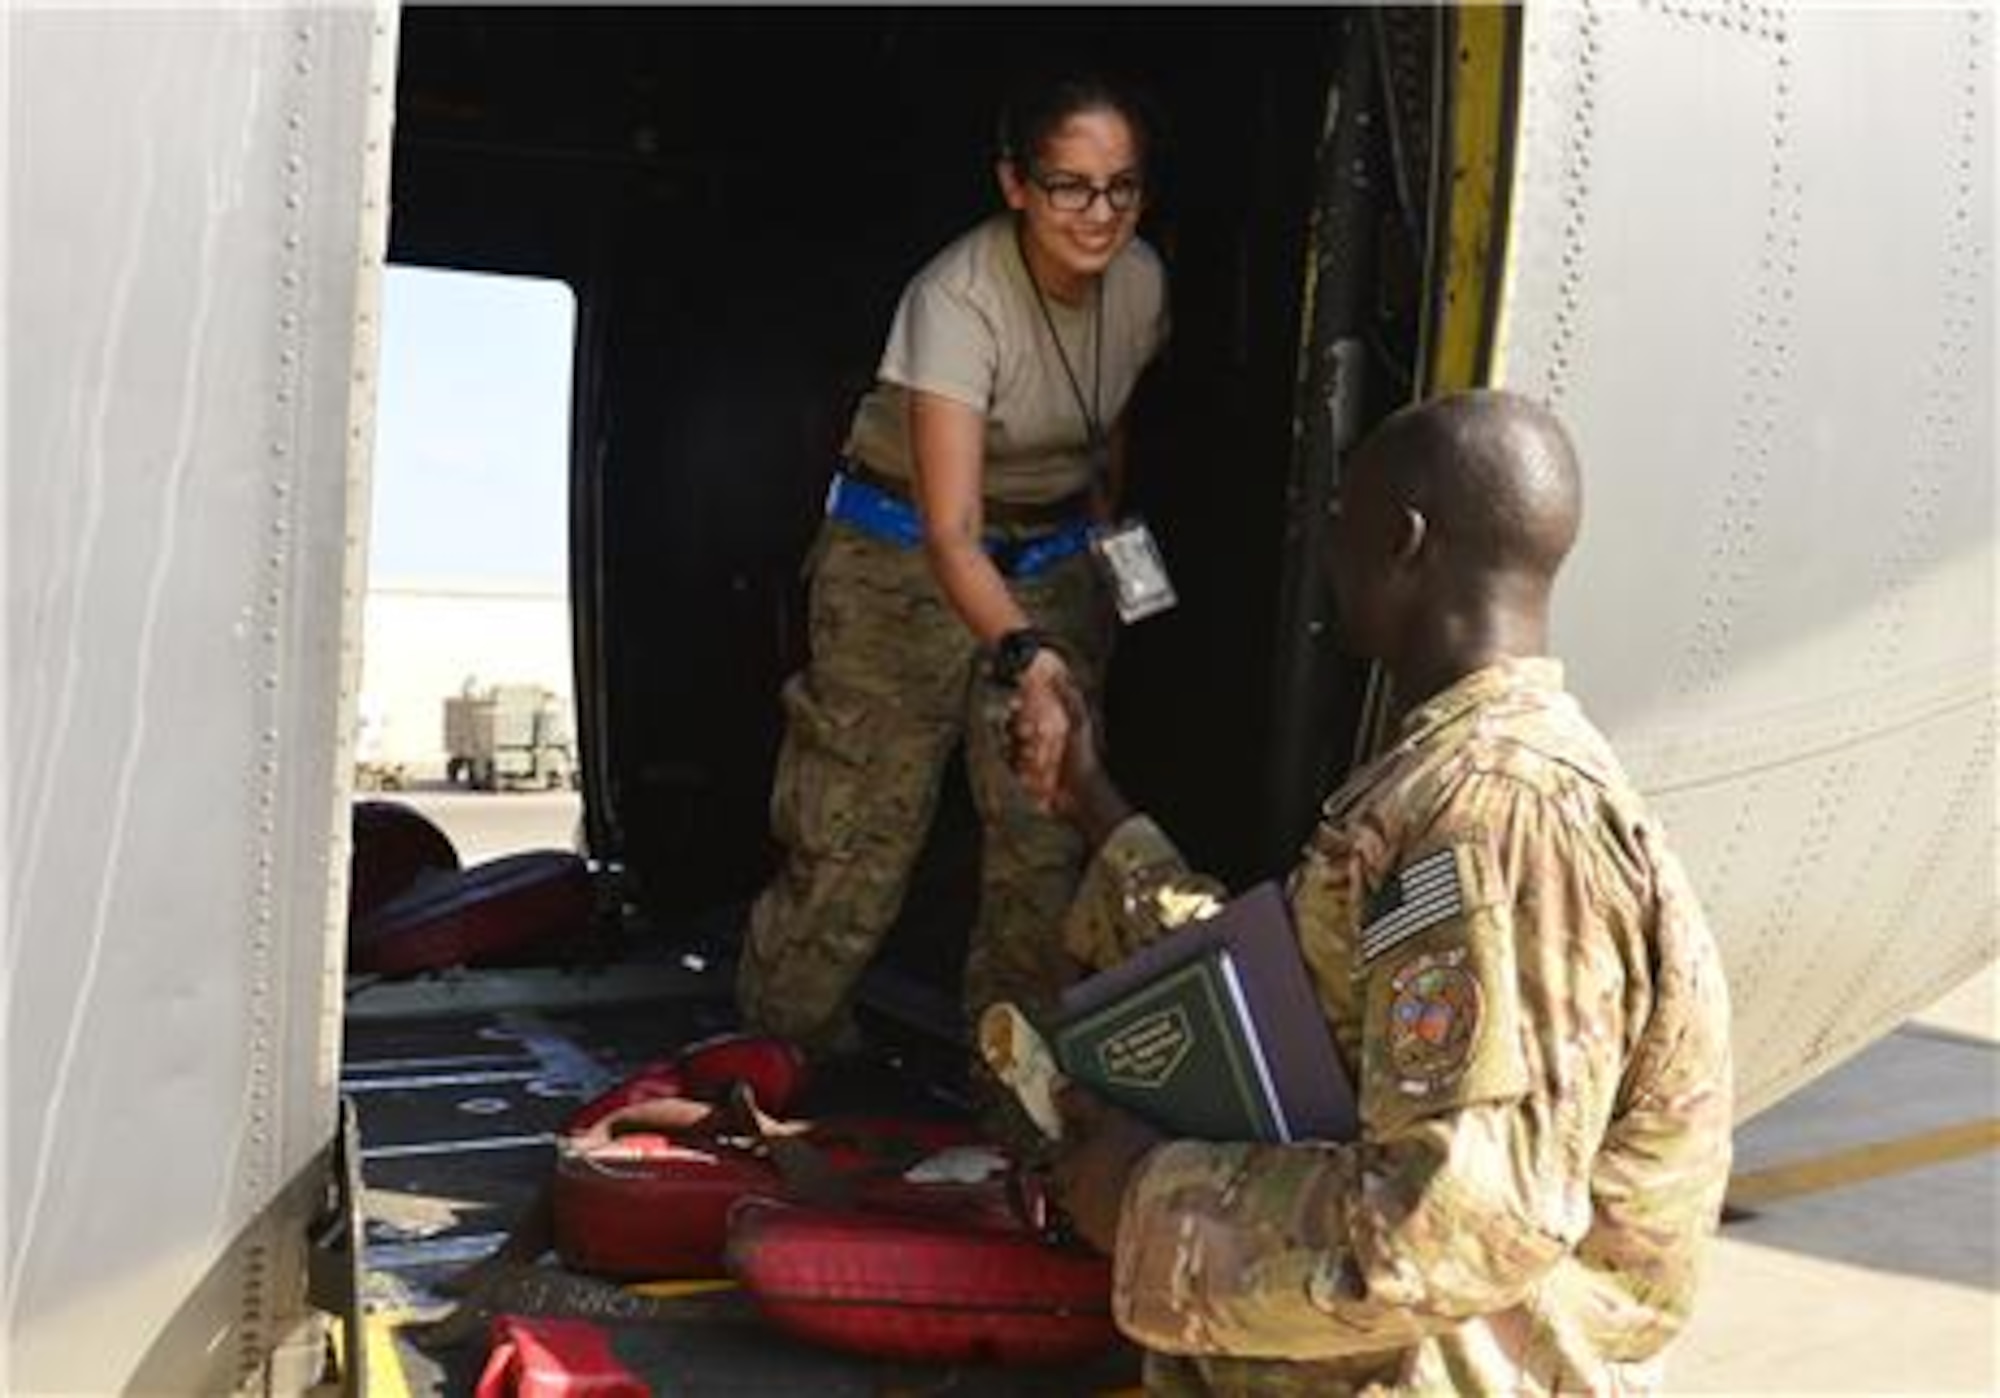 U.S. Air Force Staff Sgt. Deng Pour, non-commissioned officer in charge of religious affairs with the Combined Joint Task Force-Horn of Africa, greets Airman 1st Class Pamela Thompson, 81st Expeditionary Rescue Squadron communication and navigation specialist at Camp Lemonnier, Djibouti, Dec. 13, 2013. (U.S. Air Force photo by Staff Sgt. Antoinette Gibson/Released) 